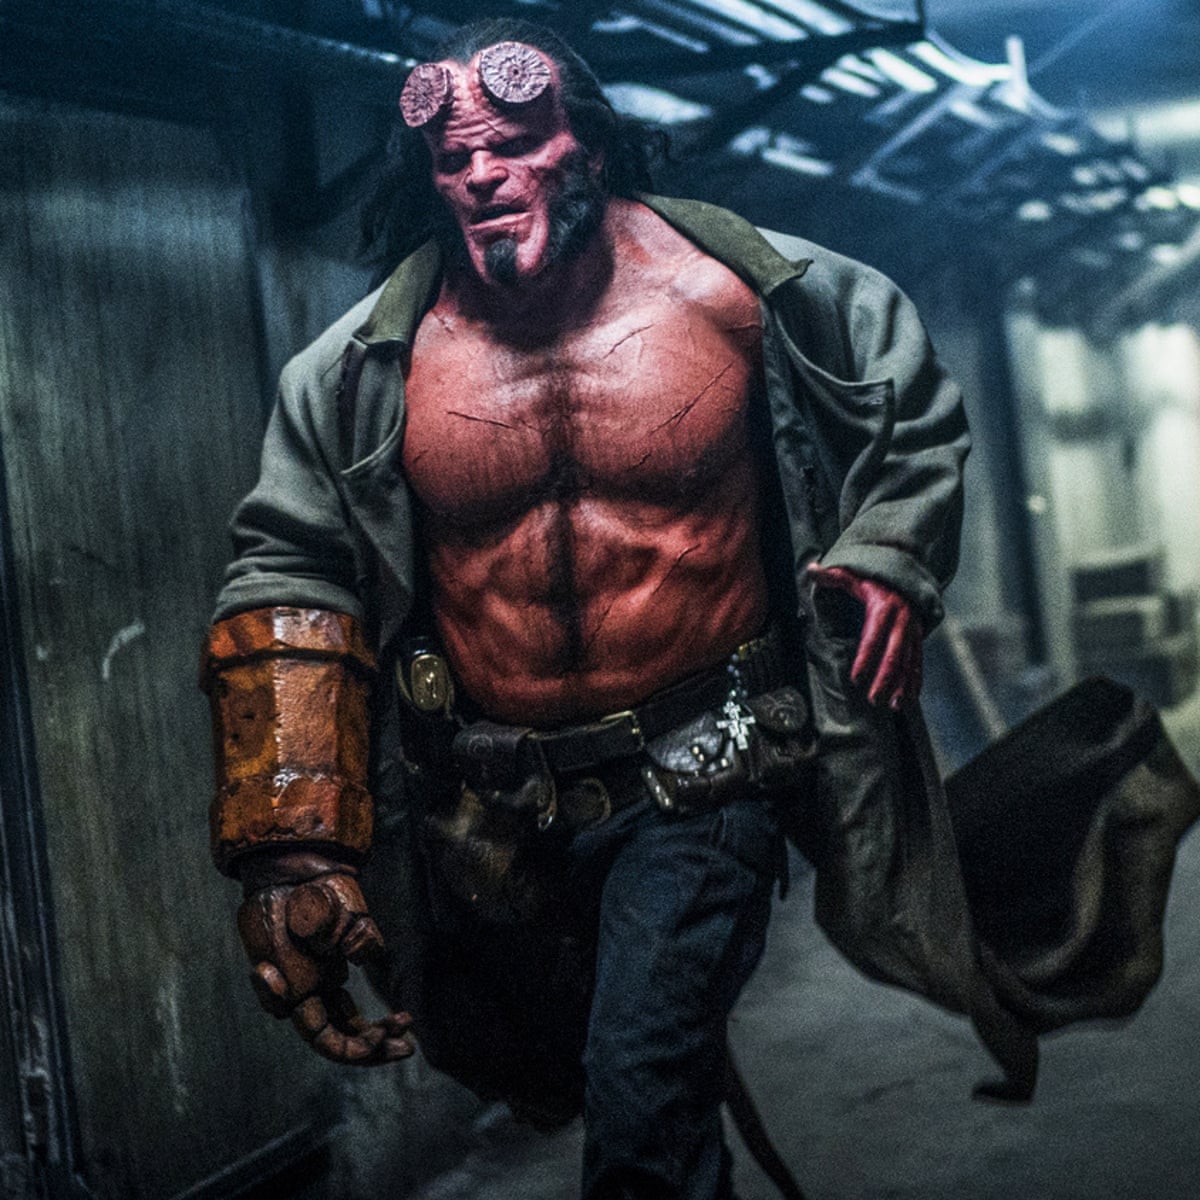 Hellboy 2019 Movie Poster Wallpapers